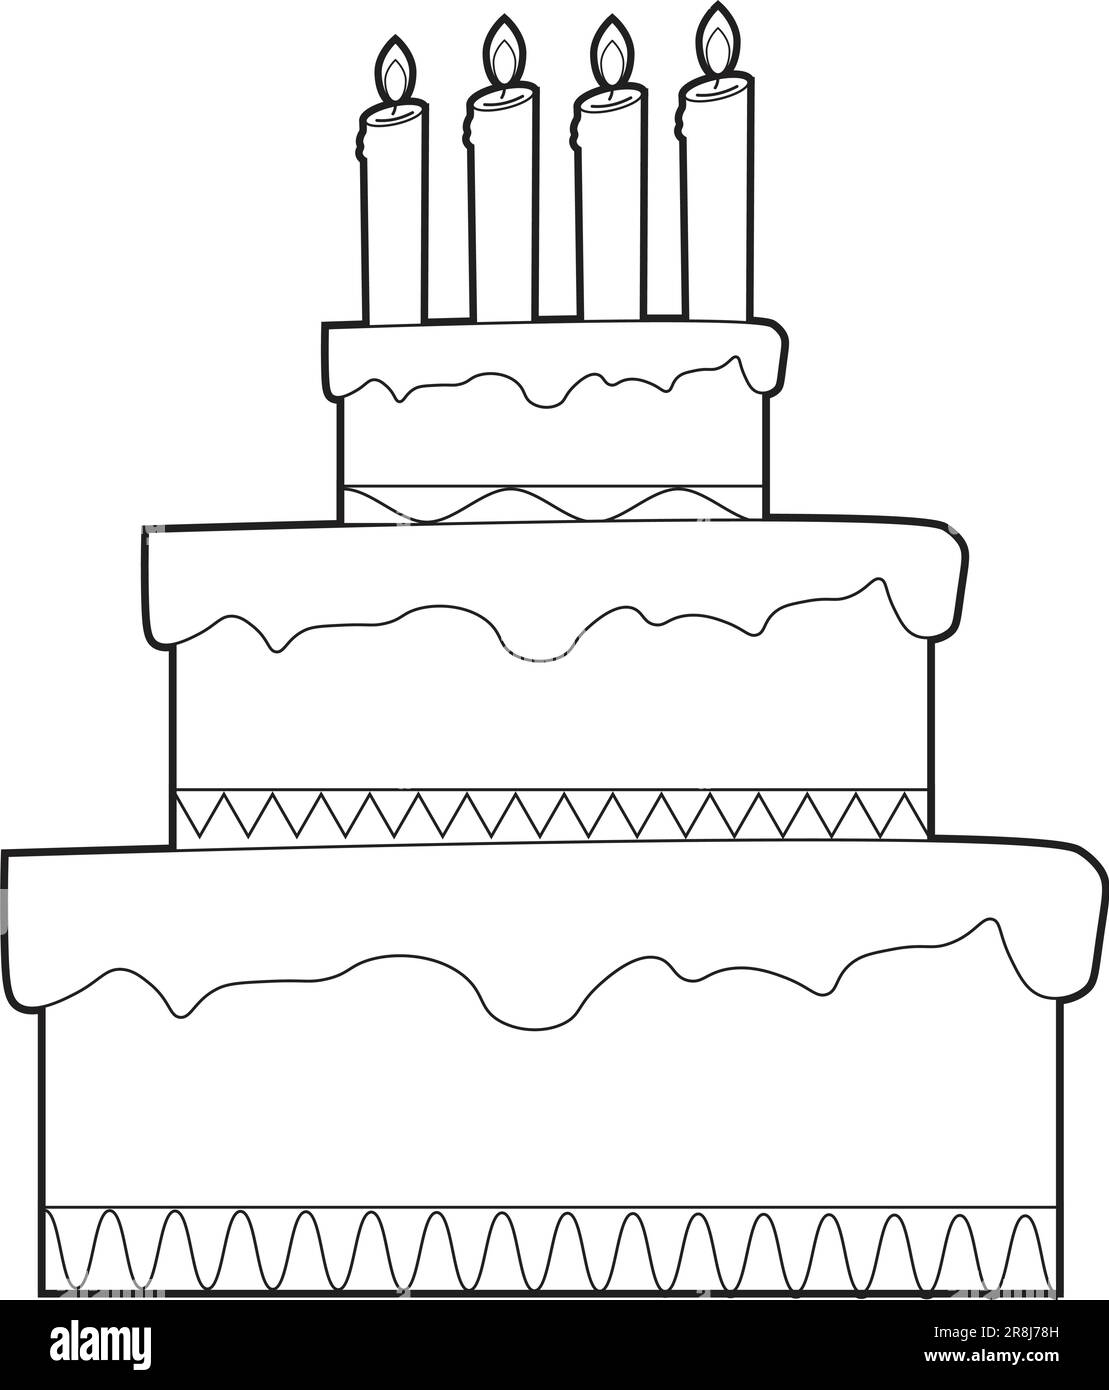 Cakes Coloring Pages Graphic by Cmeree · Creative Fabrica